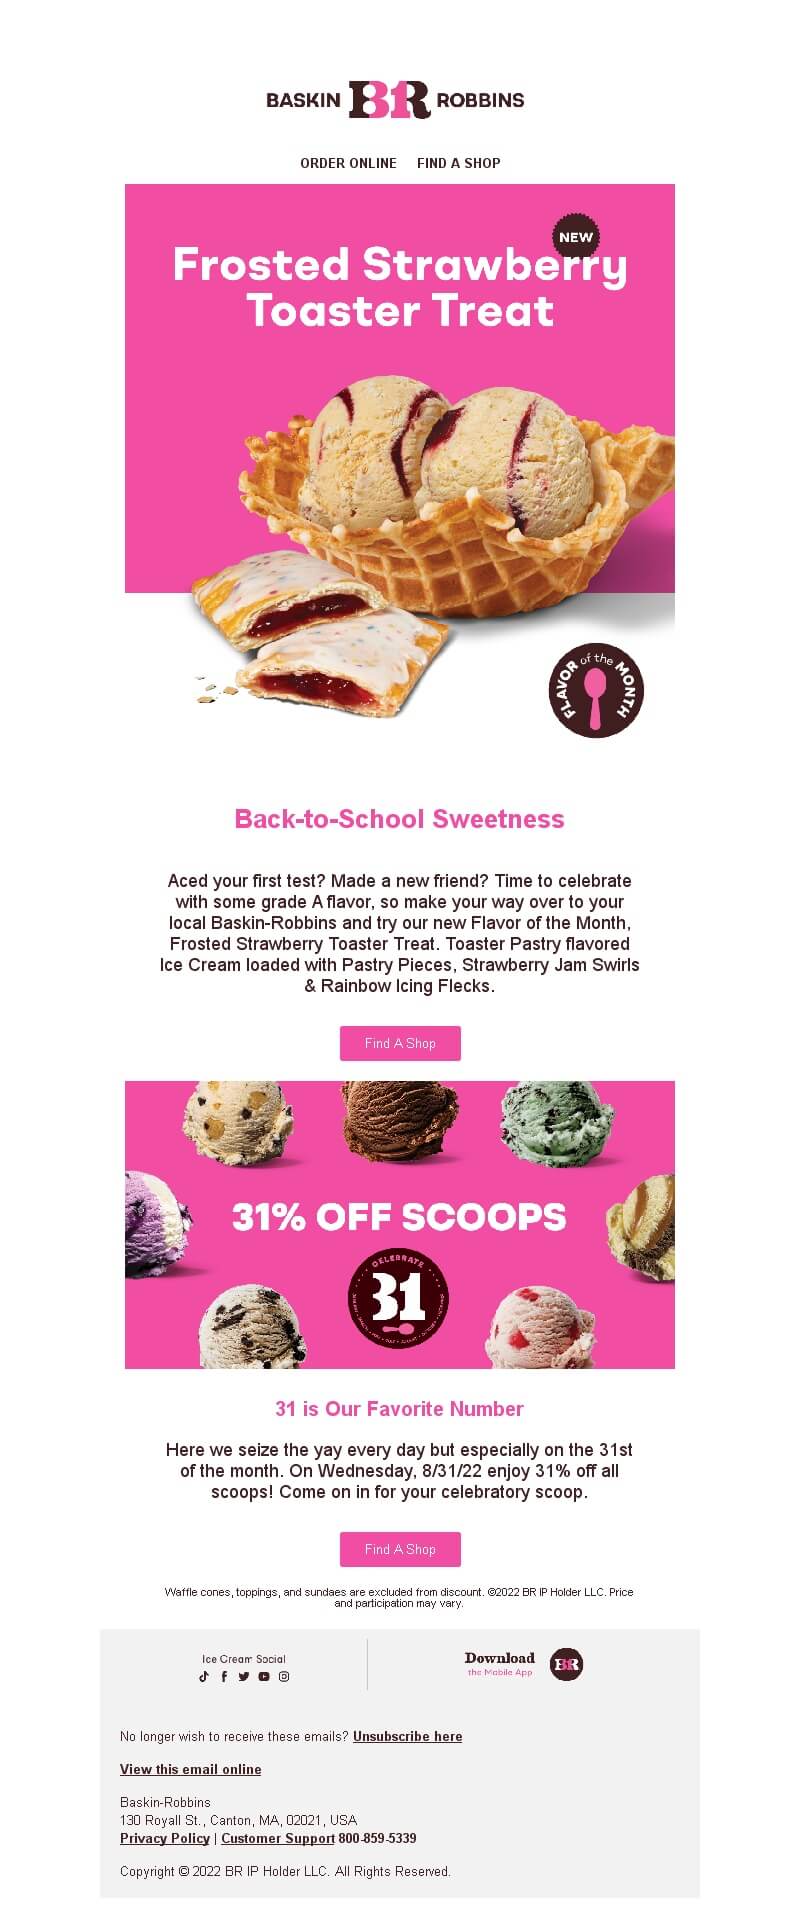 Special offer email from Baskin-Robbins